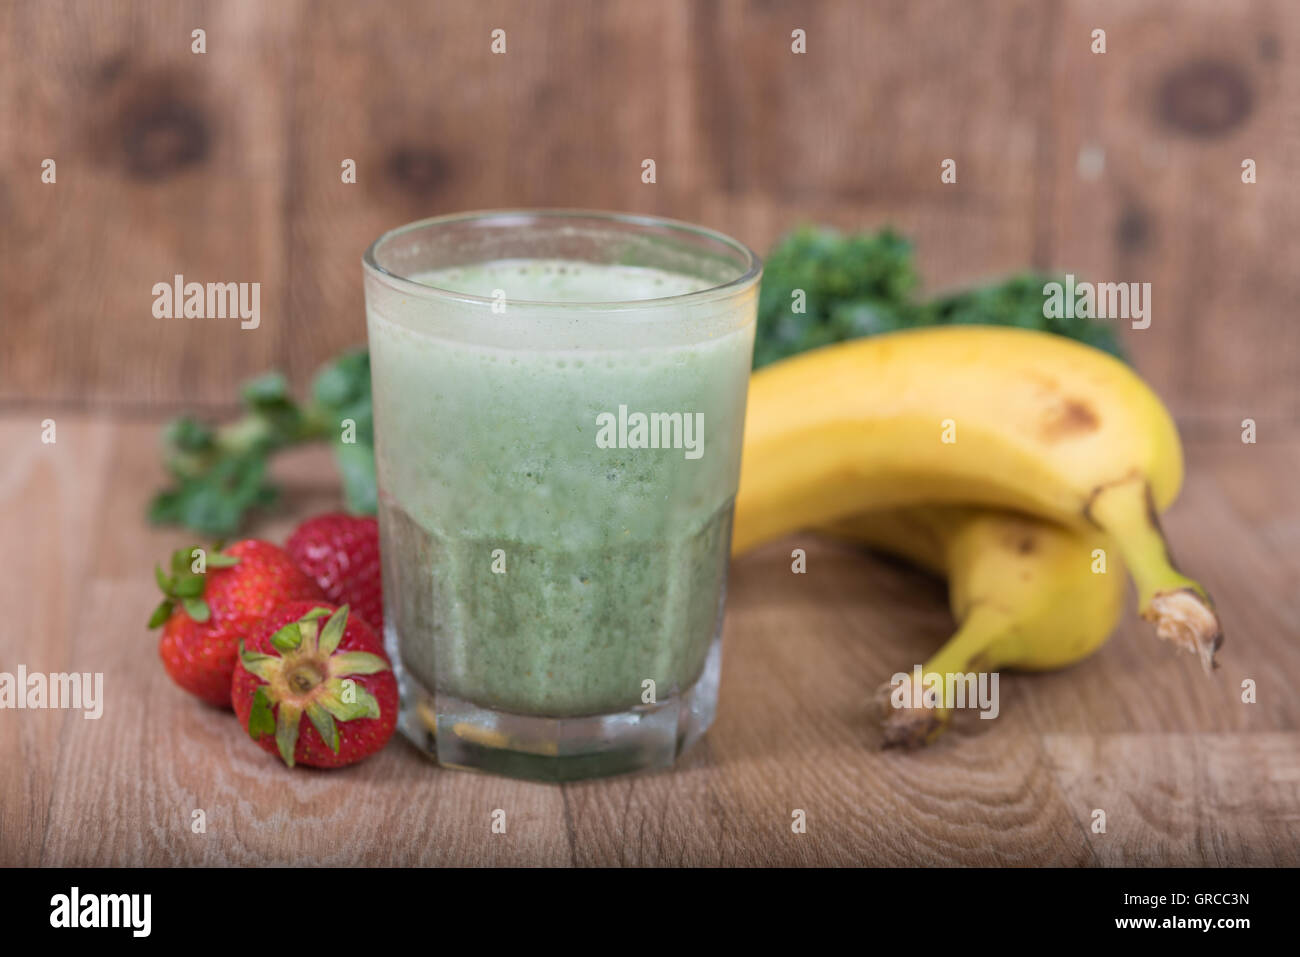 Green smoothie shake with bananas, strawberries and Kale Stock Photo